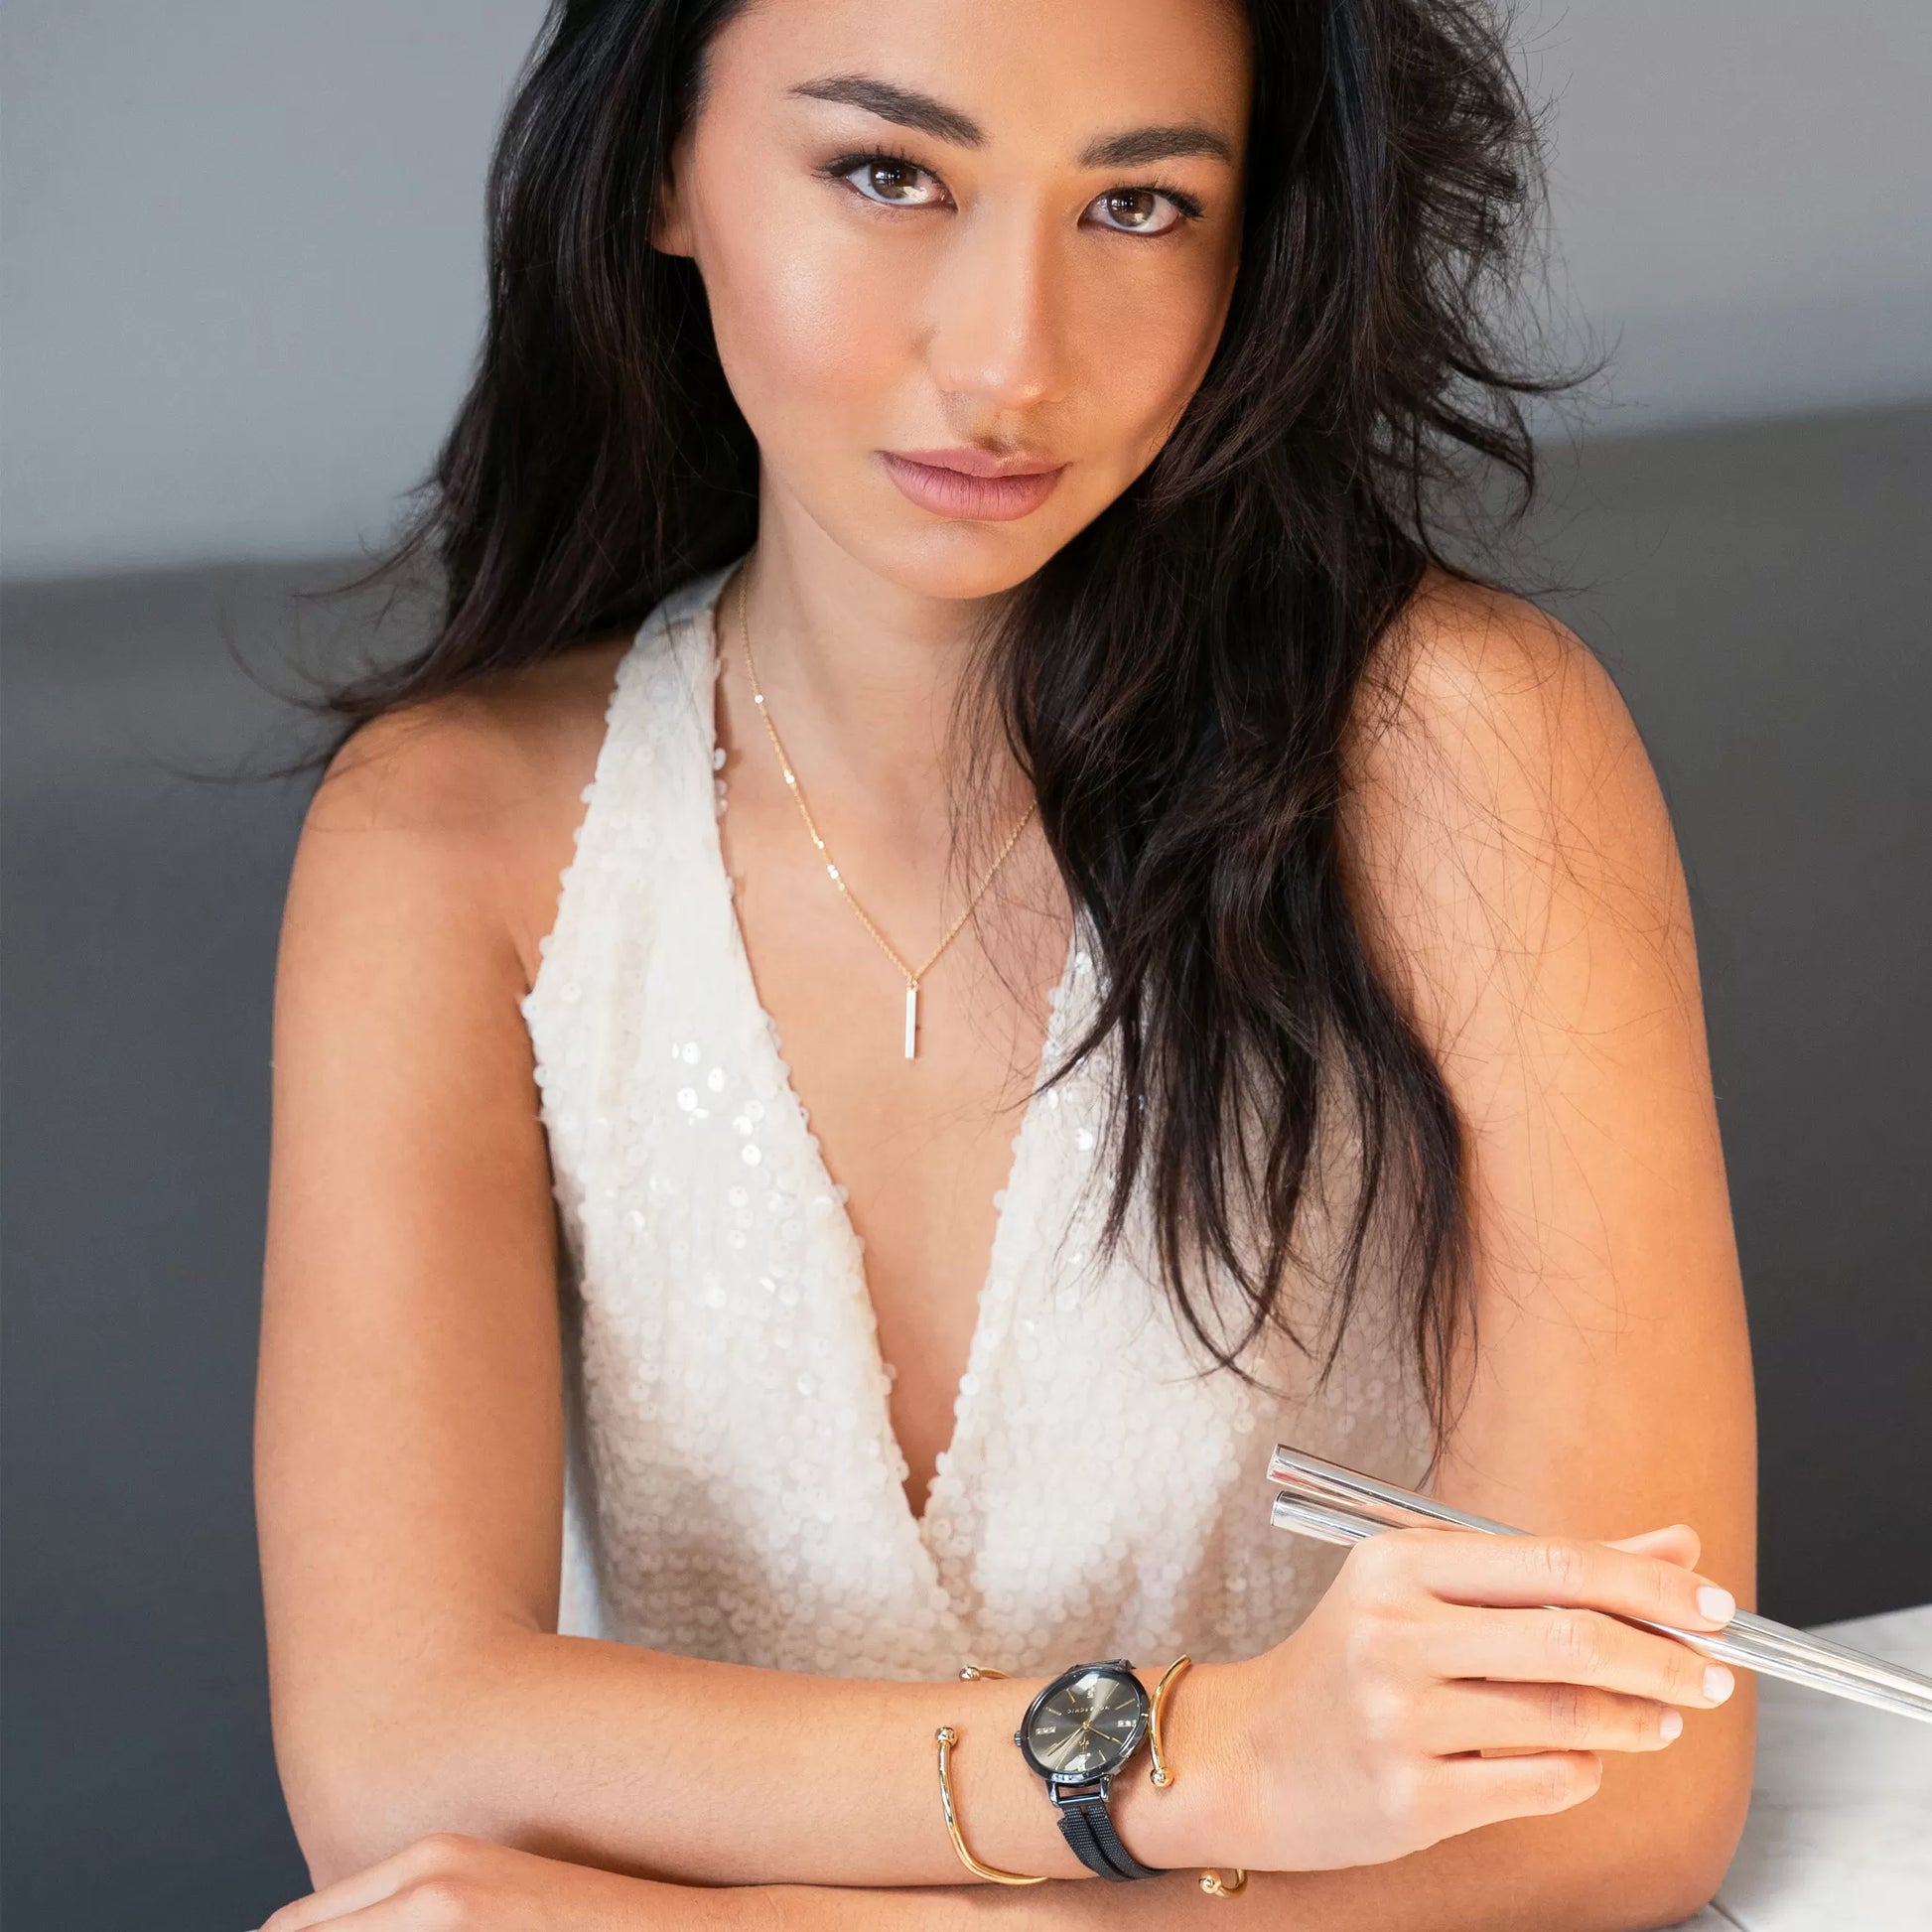 Model wearing Monarchic® Watch - Cialani - Black and Gold women's watch with double band and gold accessories